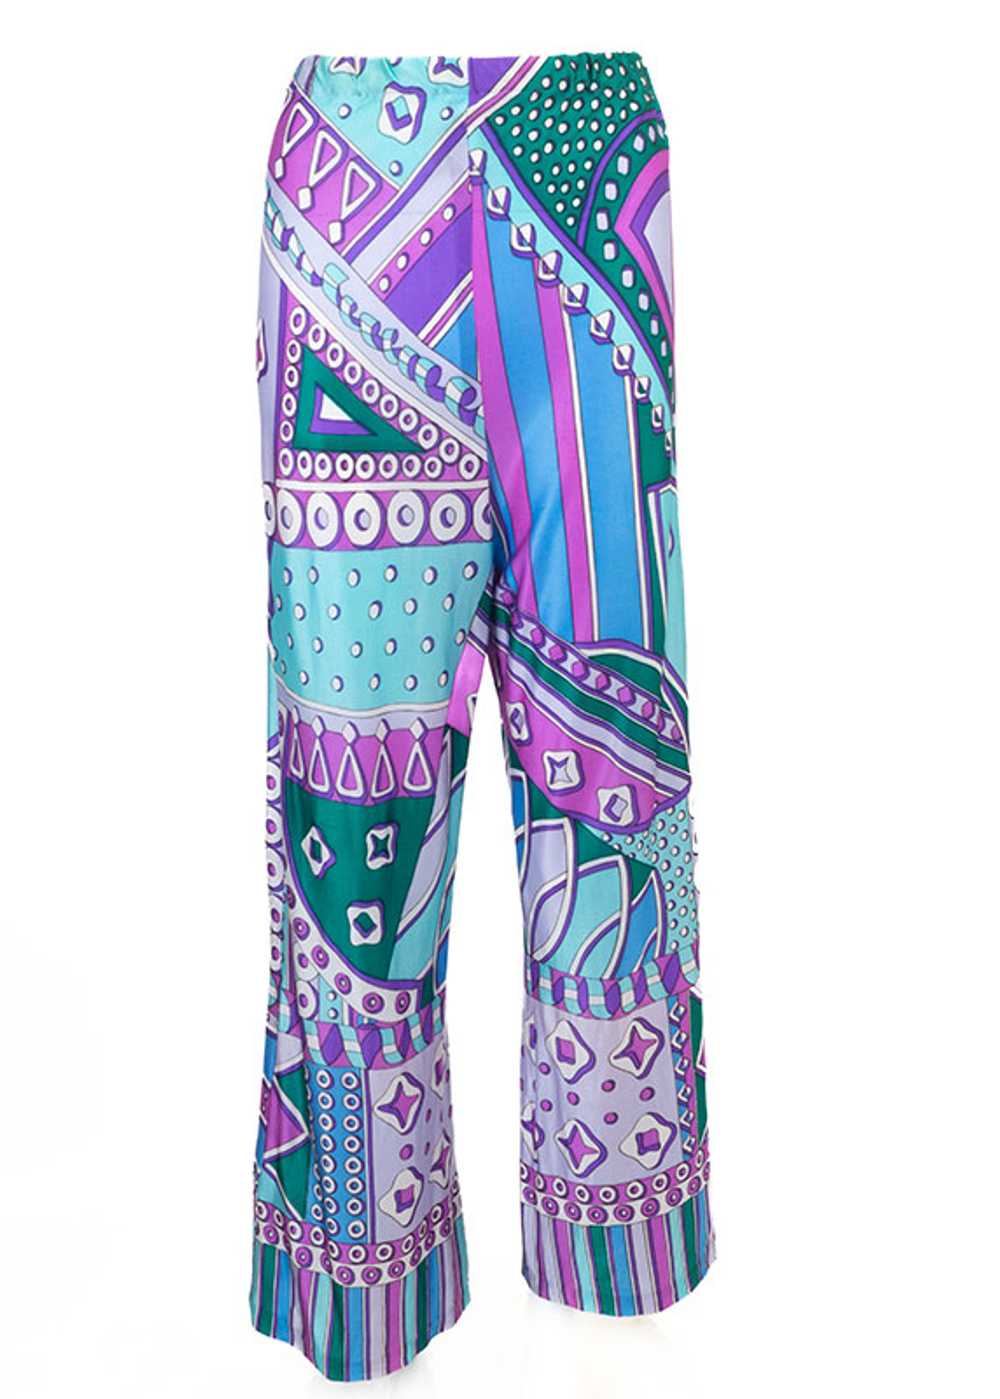 1960s Psychedelic Print Pants - image 3